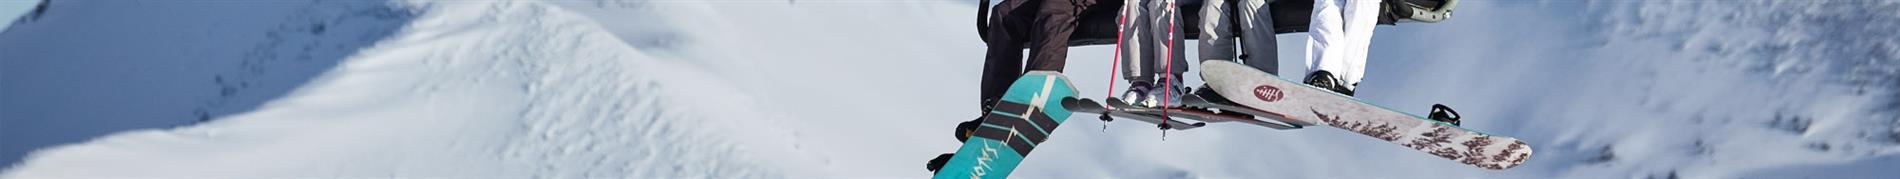 K2 Snowboarding Women's skis, snowboards, and accessories for everything snow. 